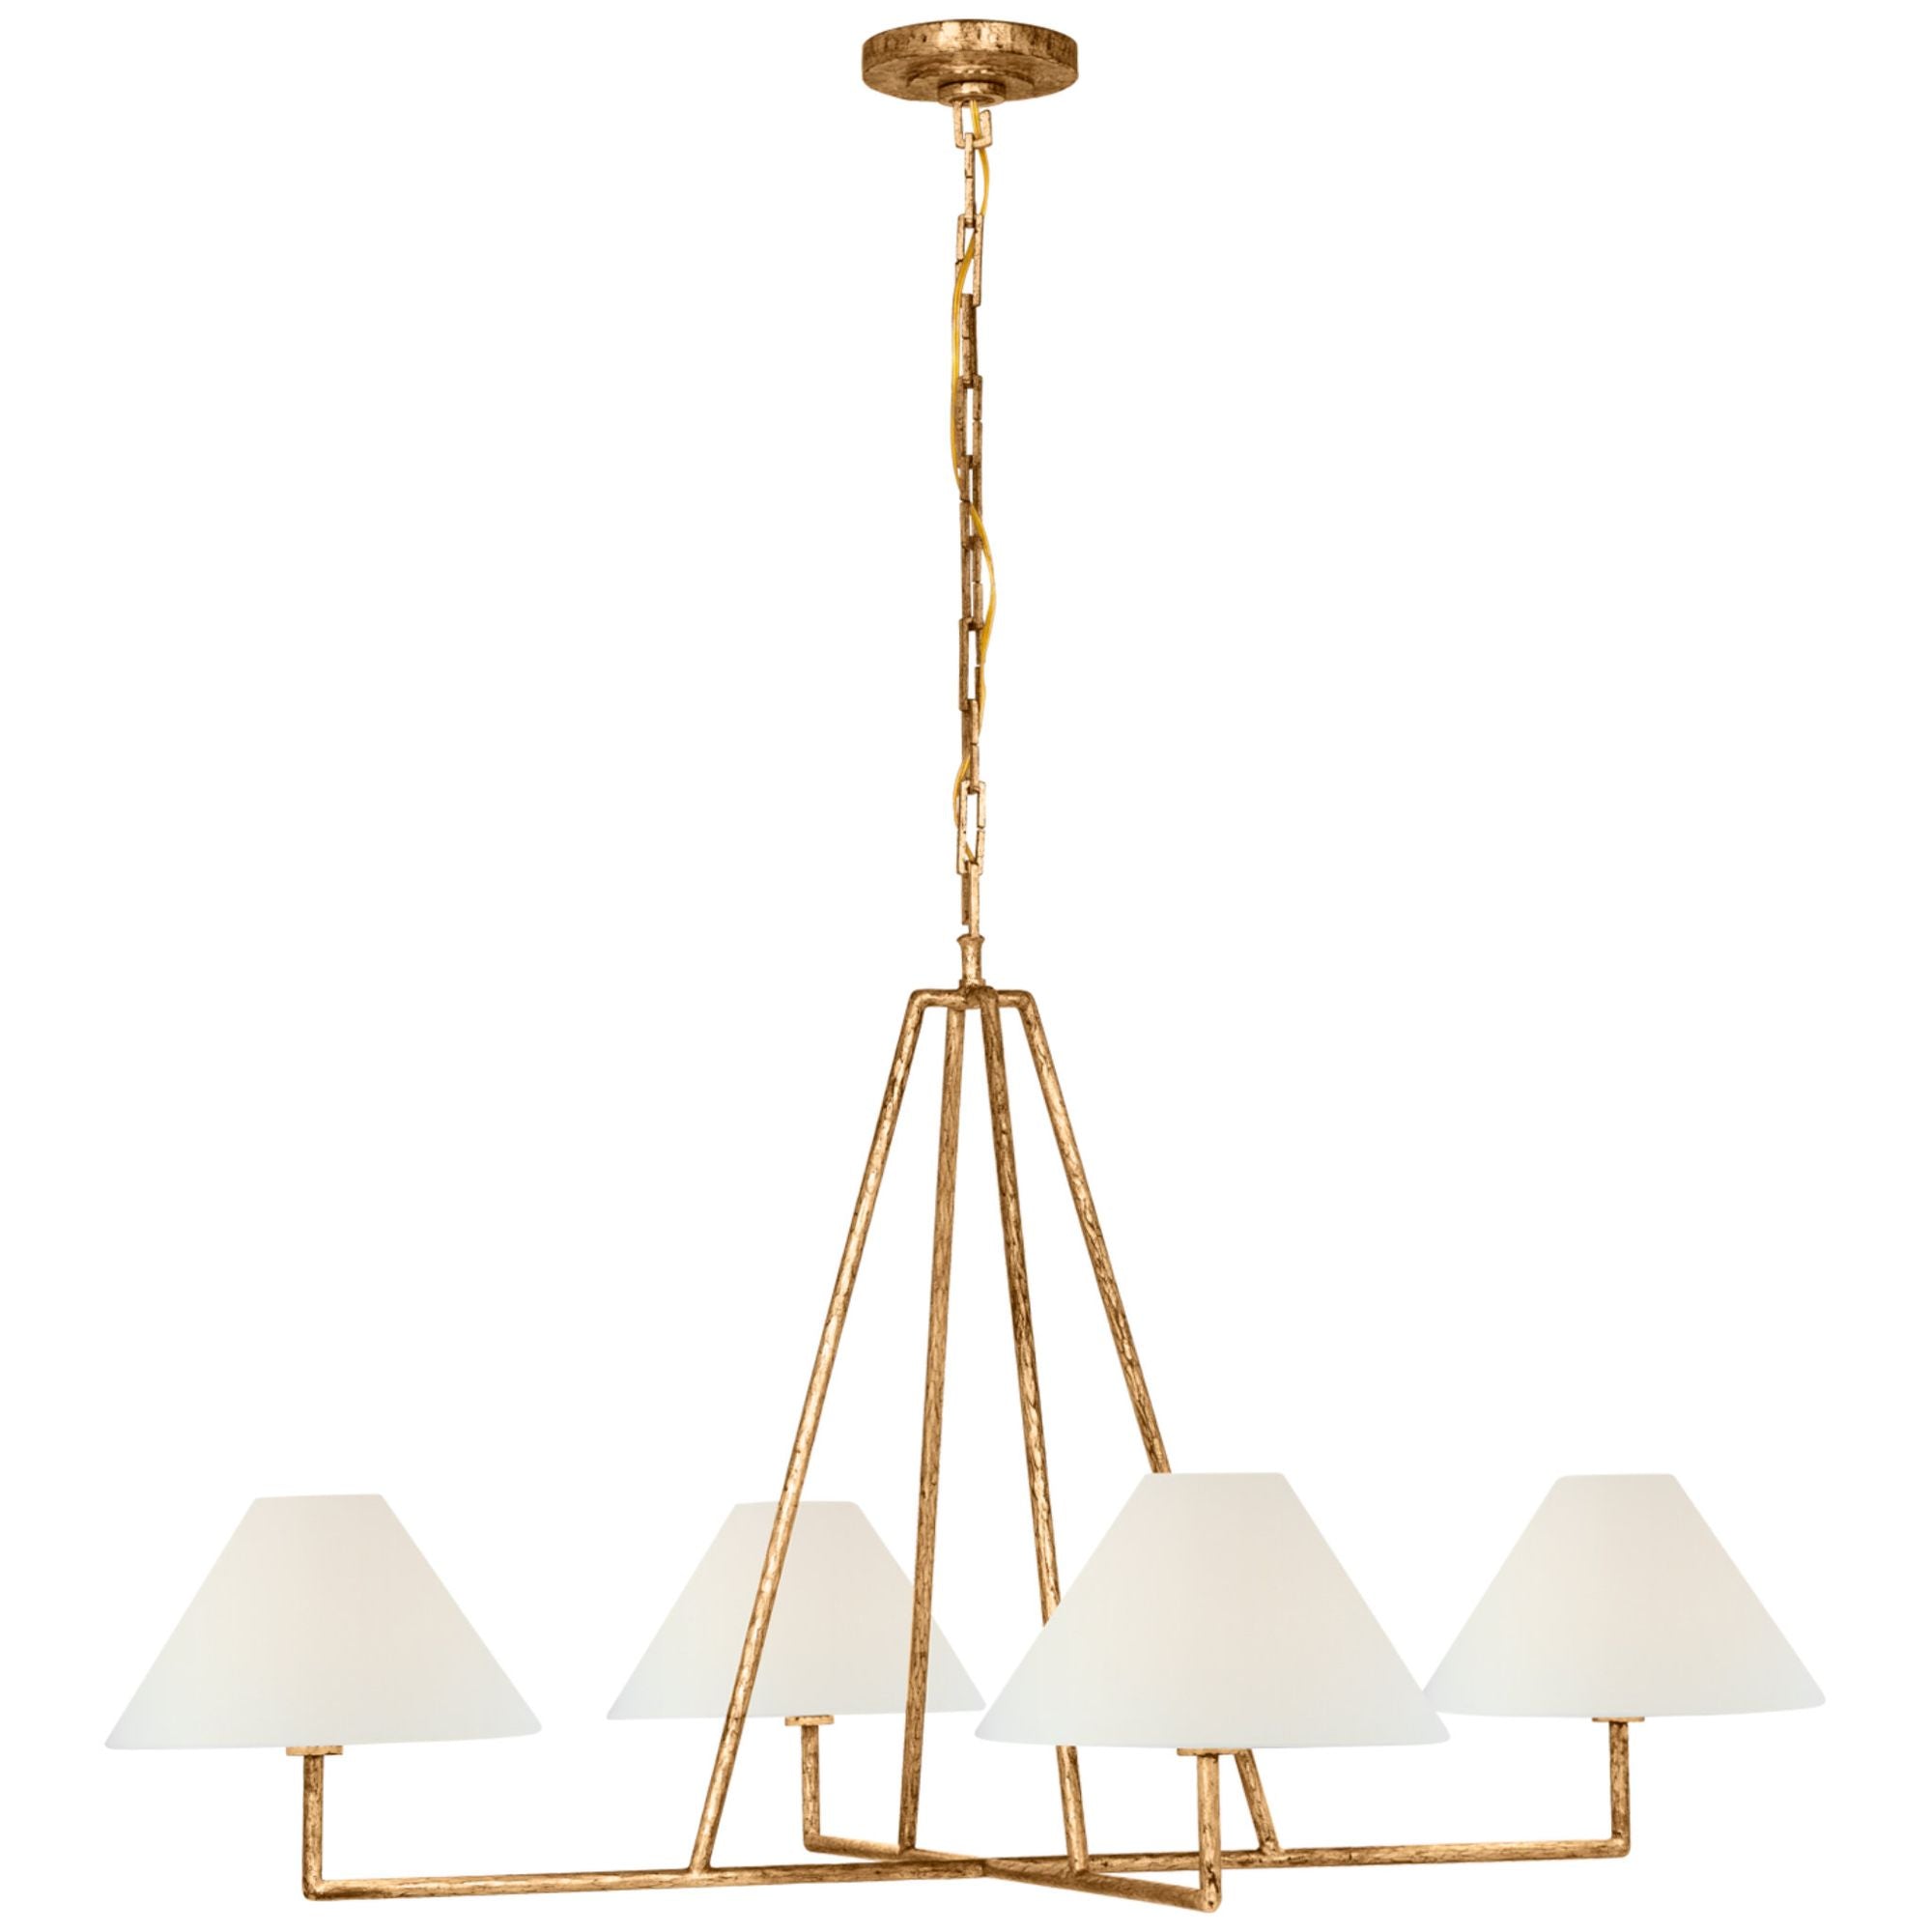 Chapman & Myers Ashton Extra Large Four Light Sculpted Chandelier in Gilded Iron with Linen Shades